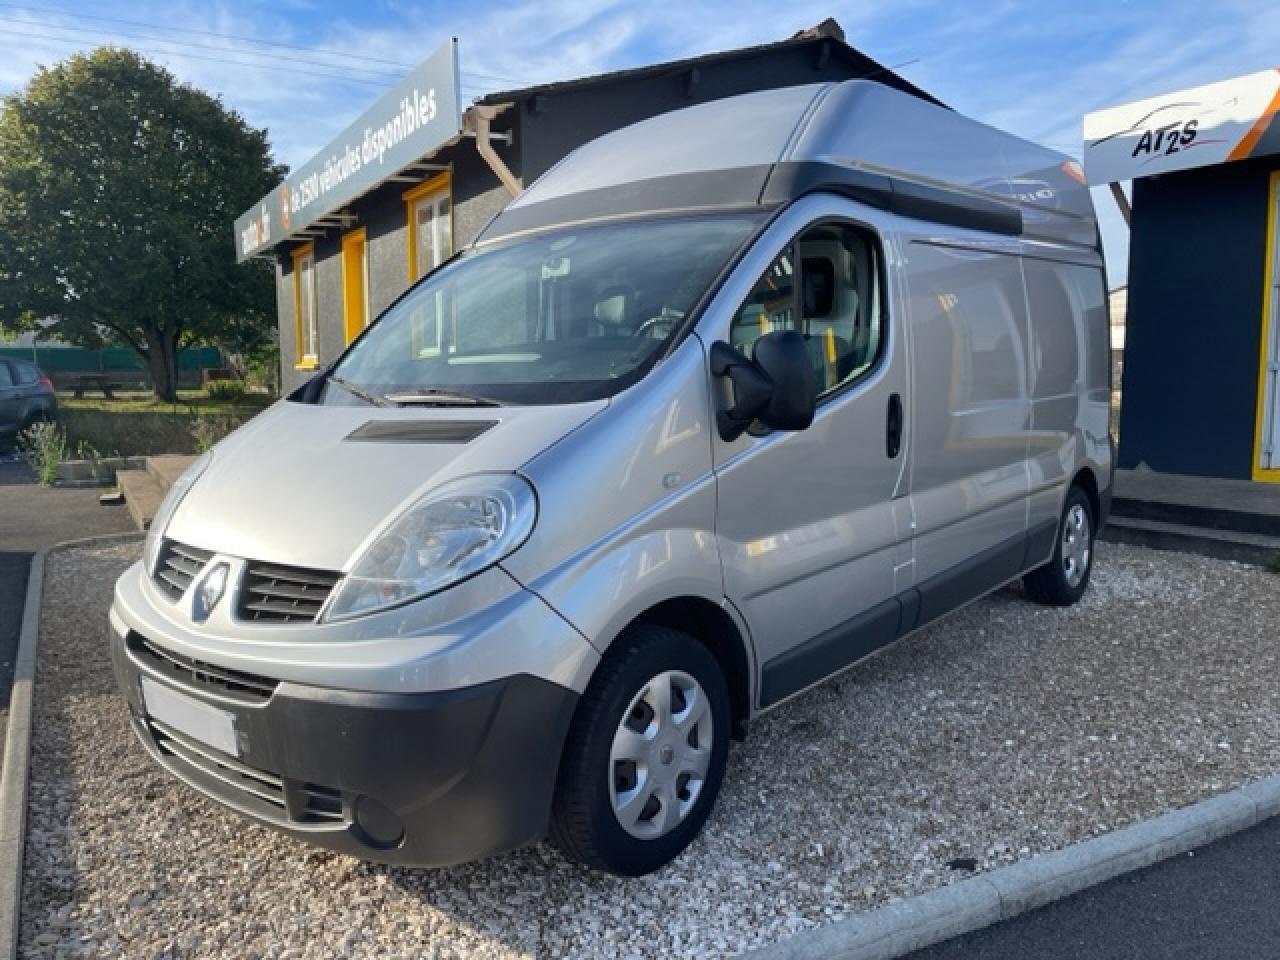 RENAULT-TRAFIC-Trafic L2H2 1200 Kg 2.0 dCi - 90  II FOURGON Fourgon Grand Confort L2H2 